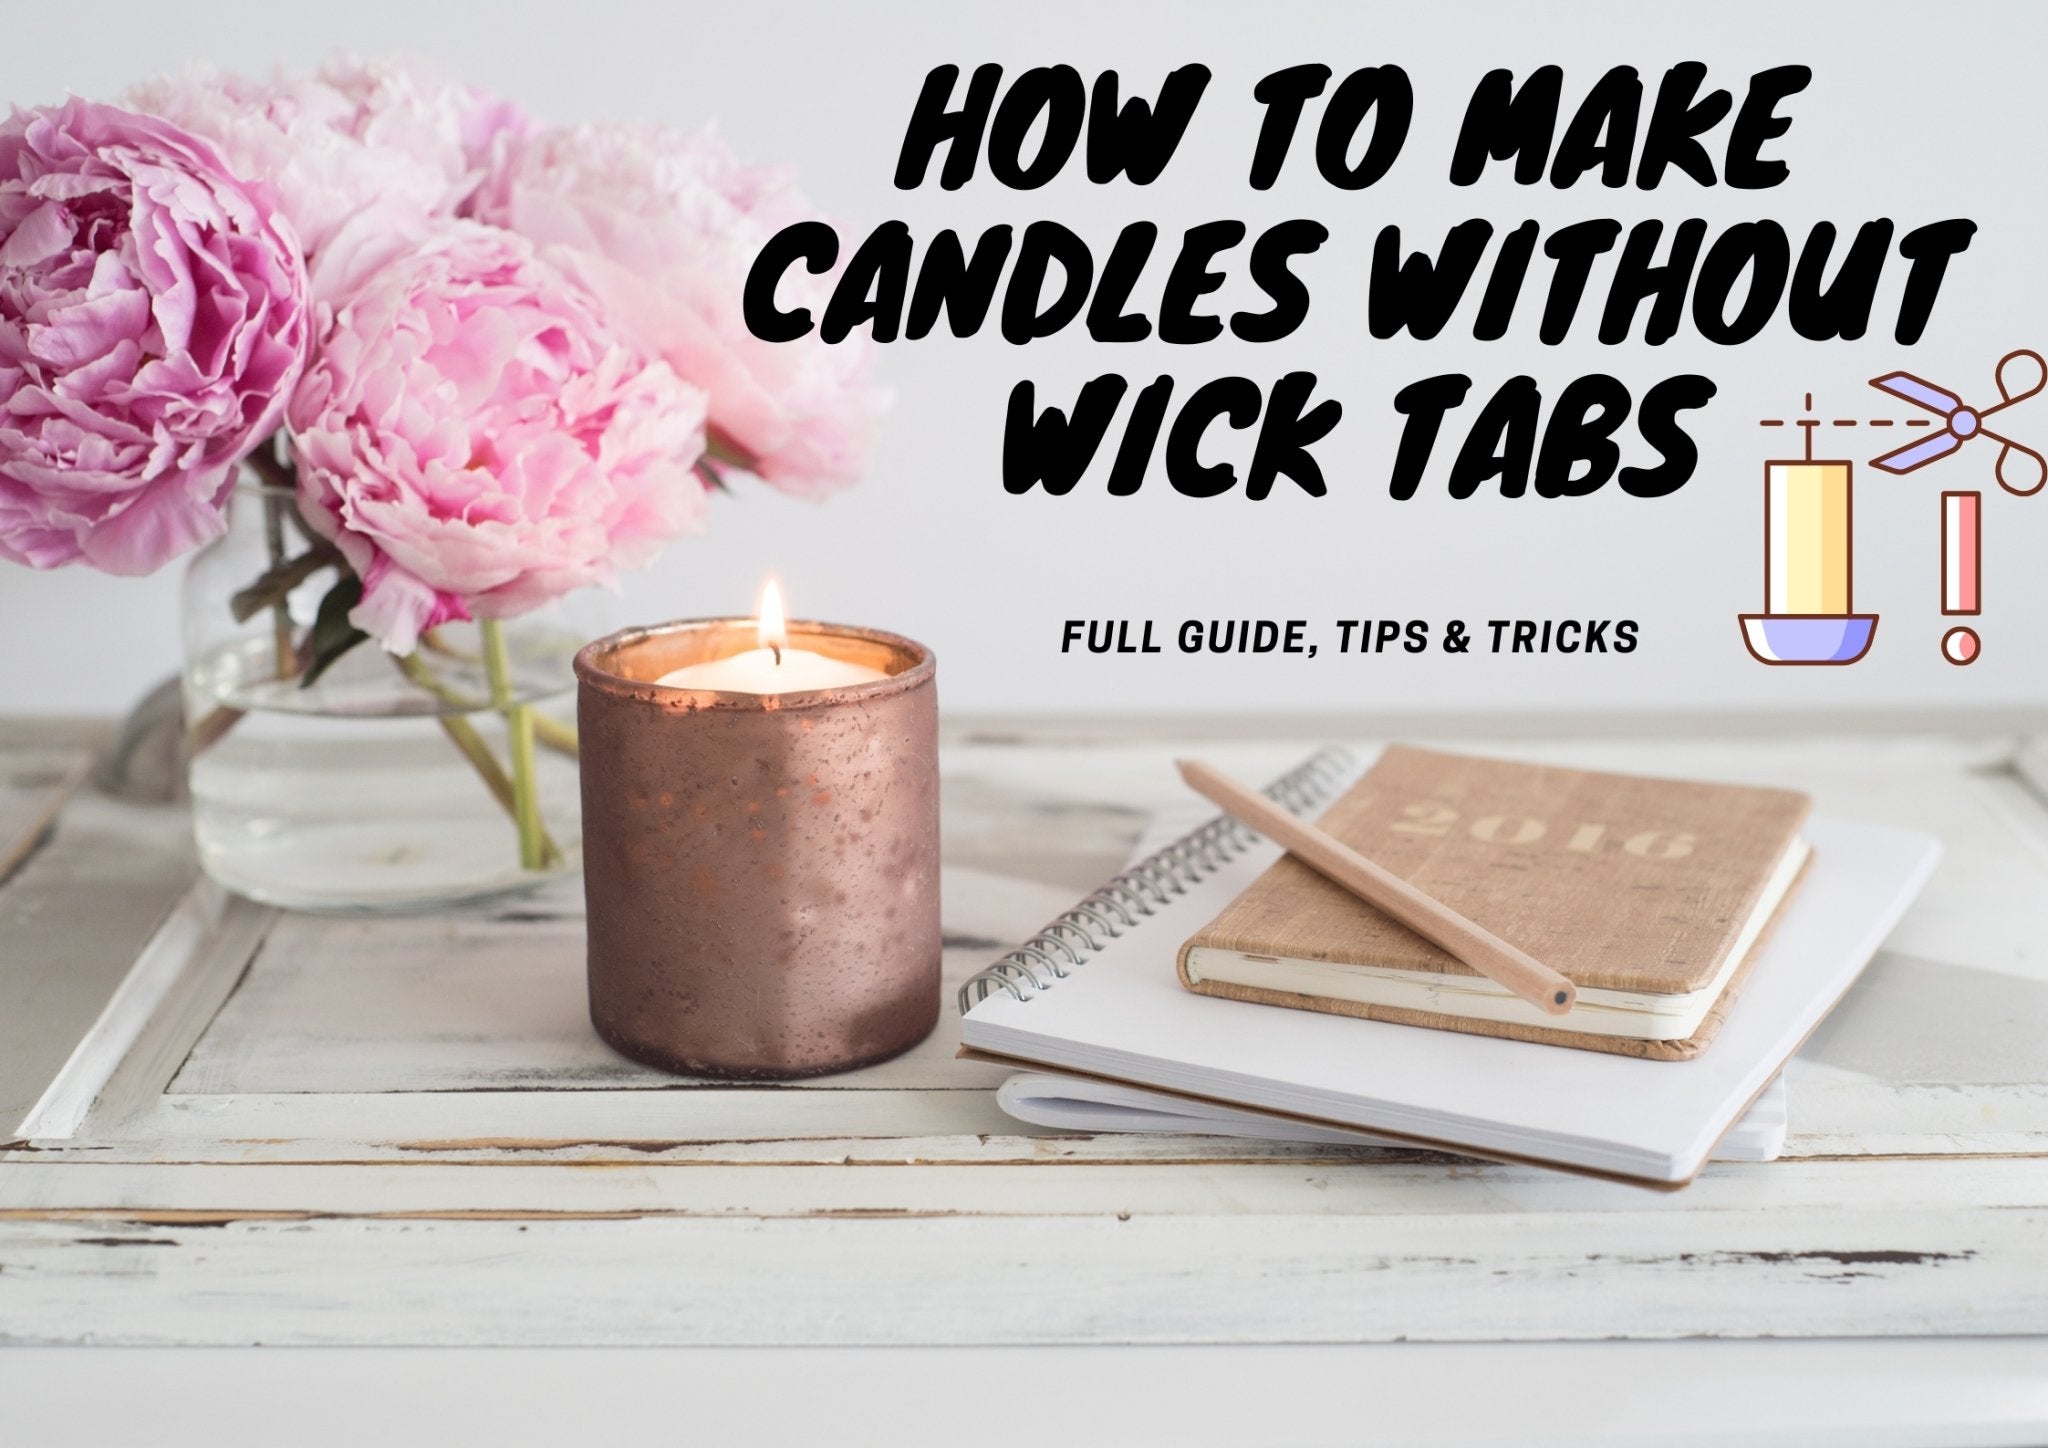 Making candles without wick tabs 